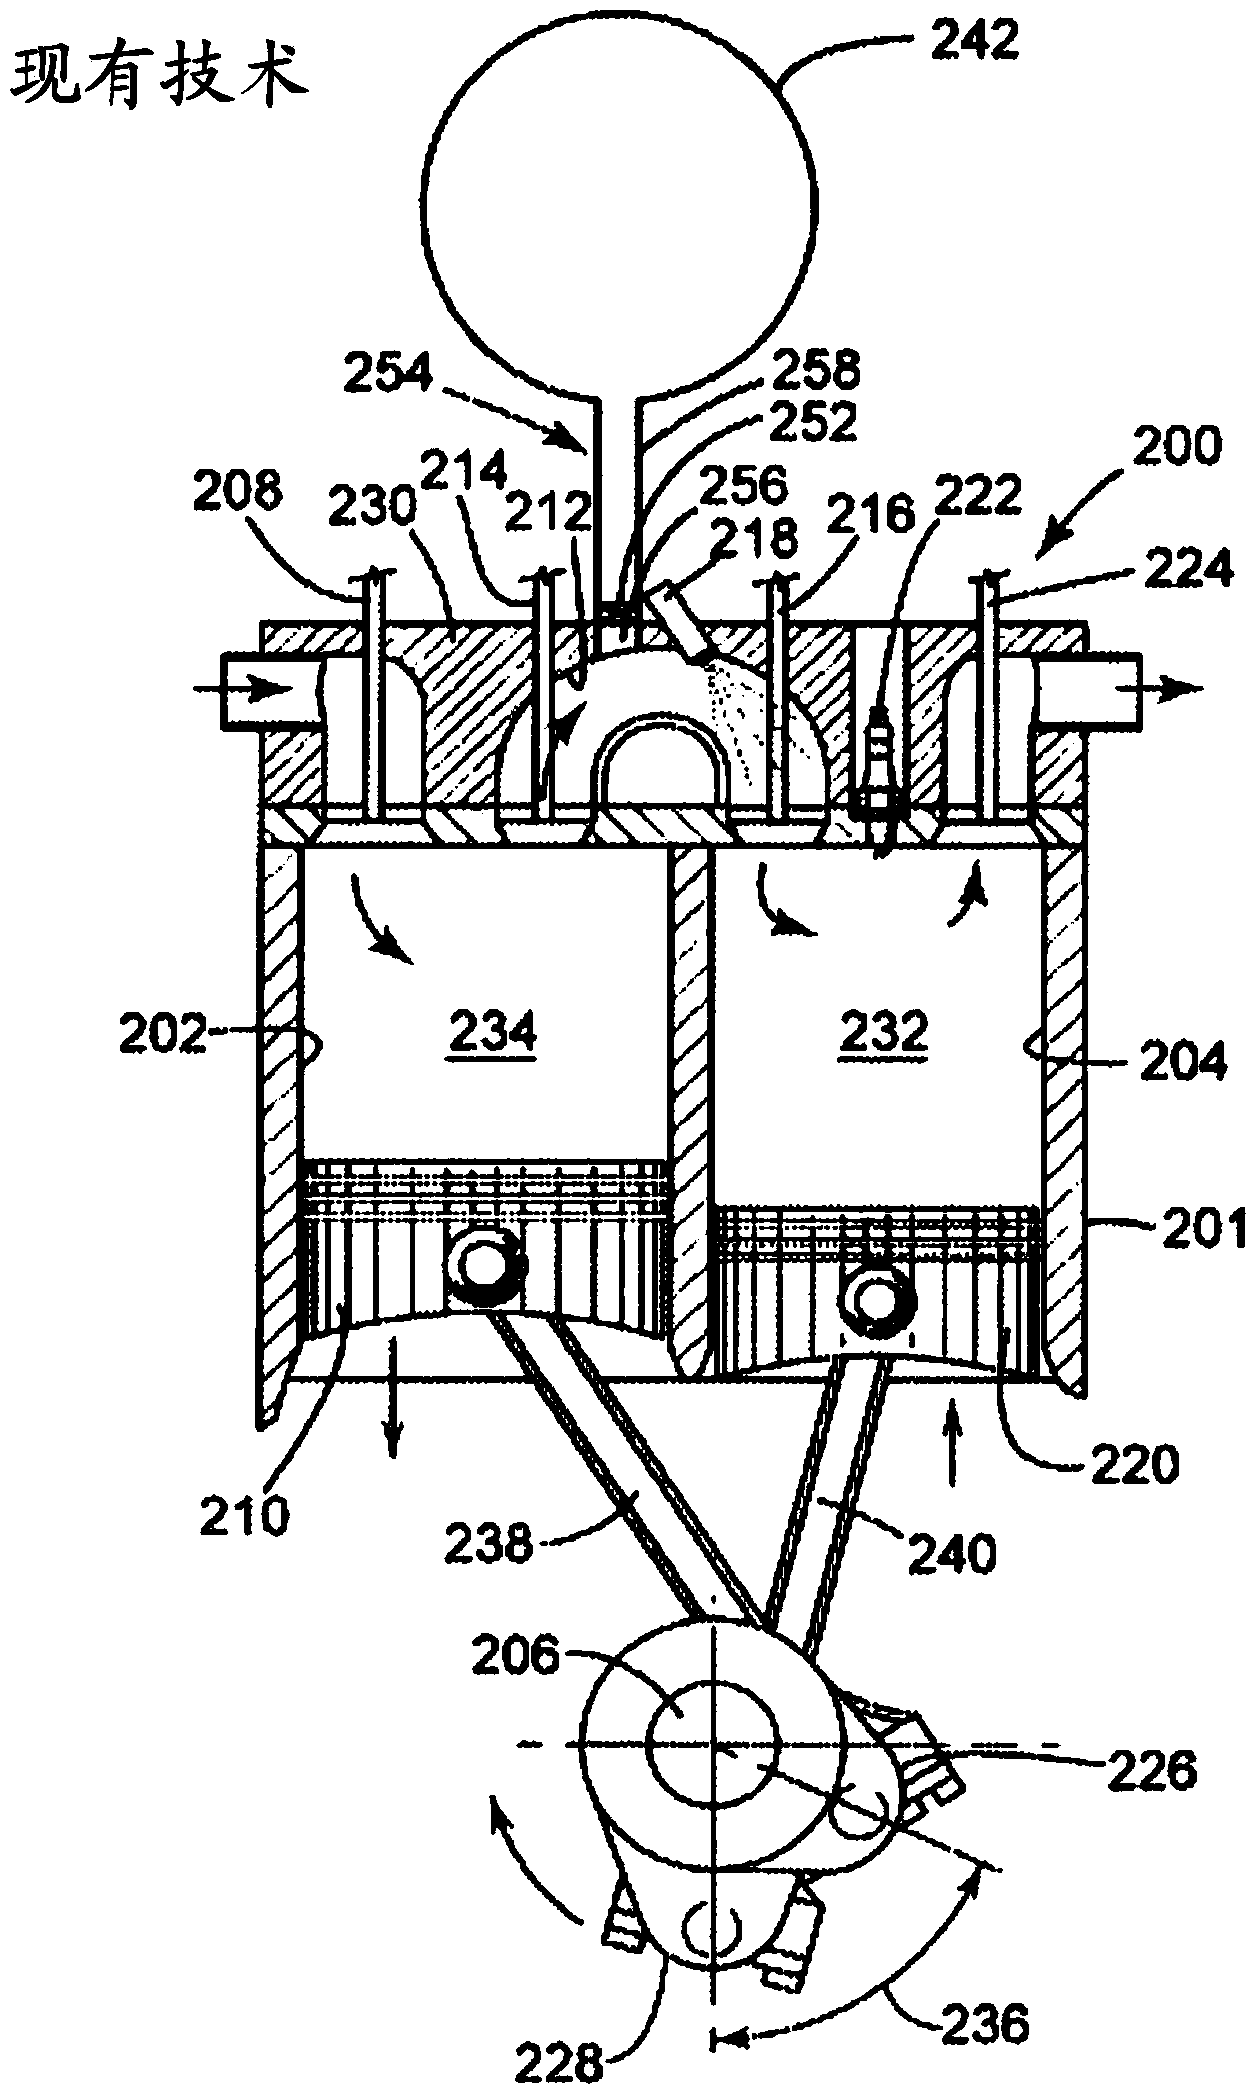 Lost-motion variable valve actuation system with cam phaser